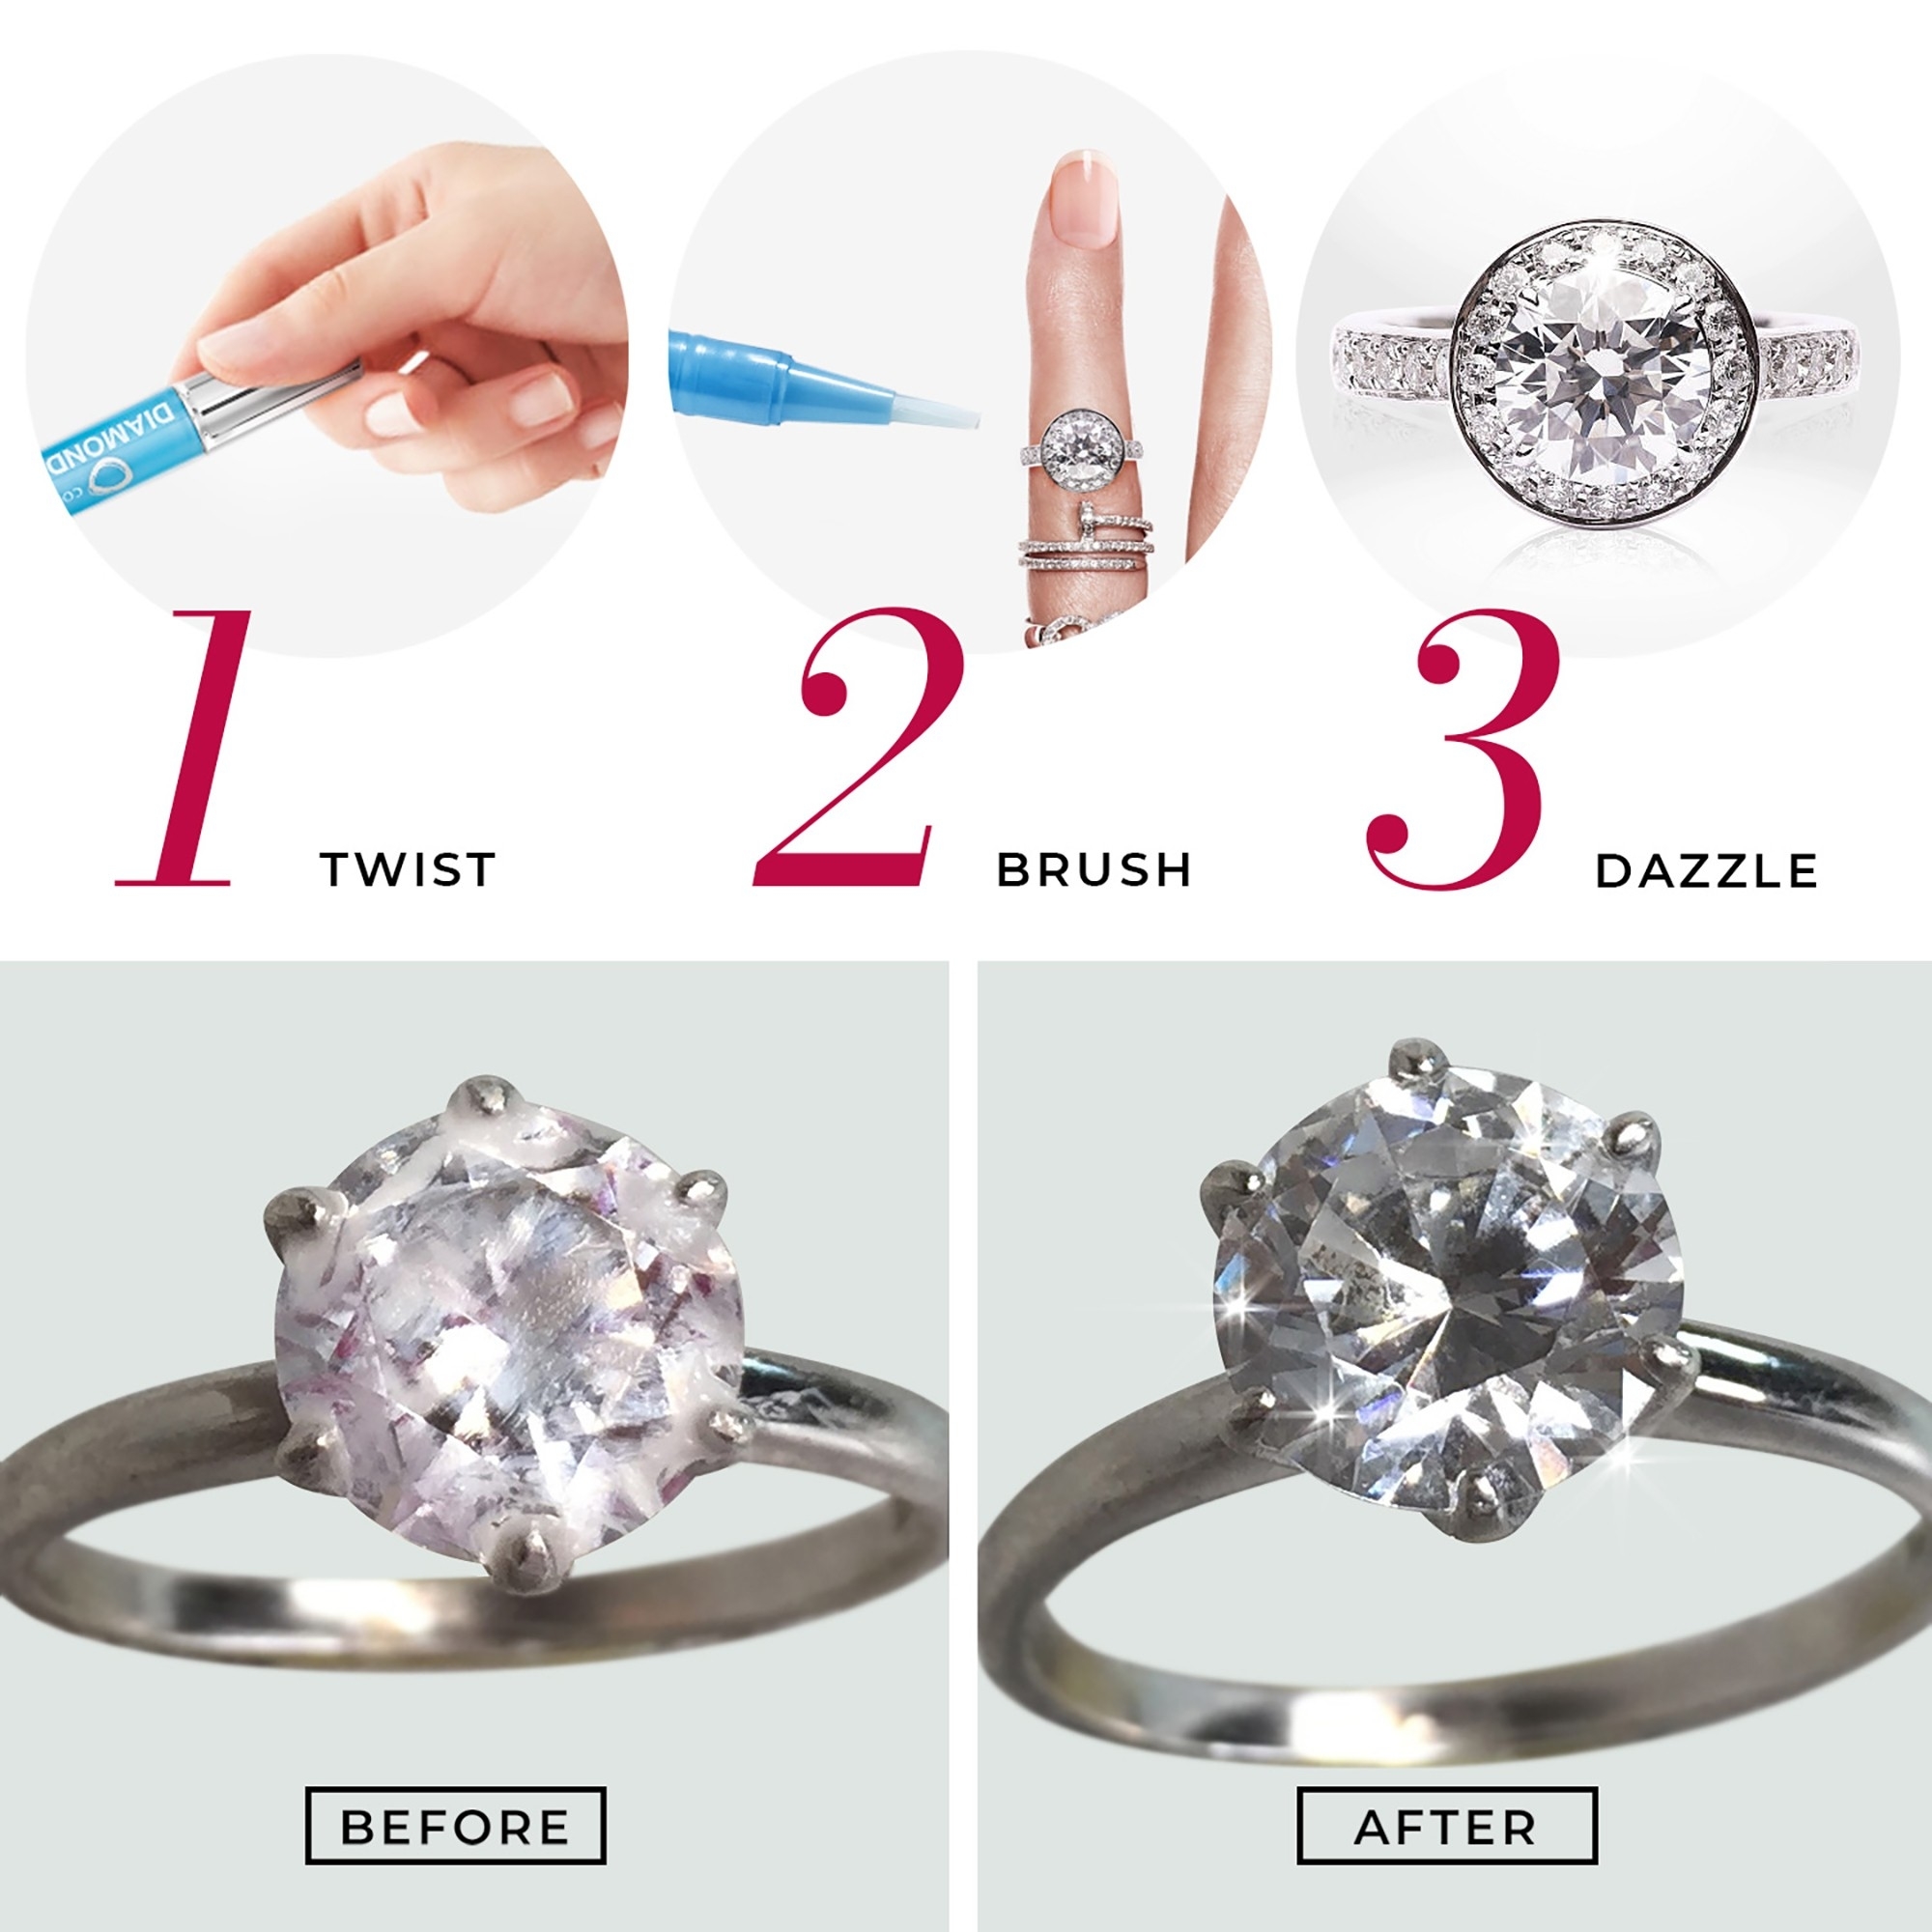 Step-by-step guide showing how to apply the product to enhance the sparkle of a ring, with before and after results